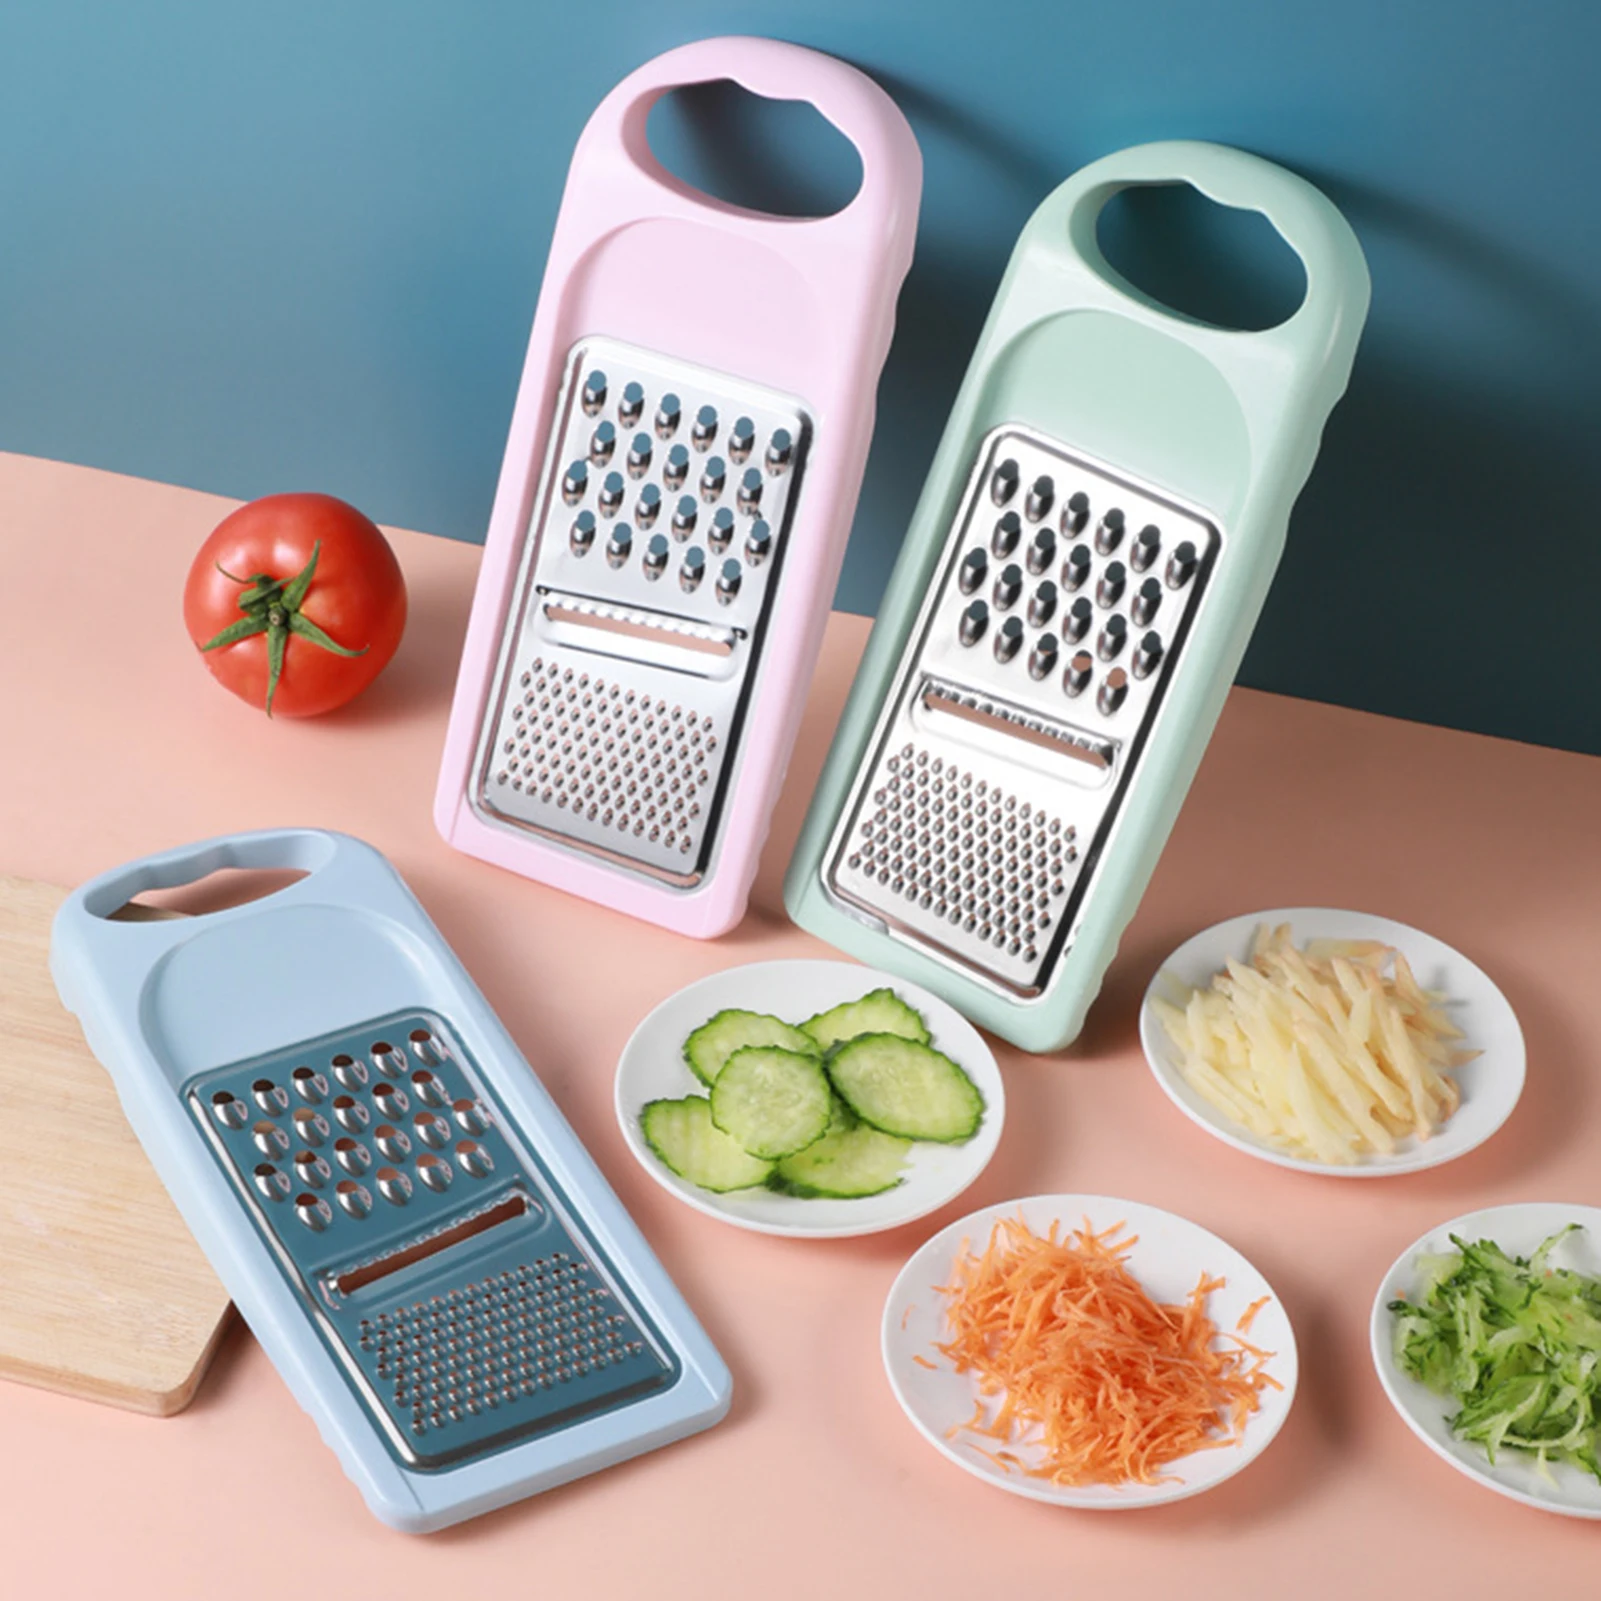 https://ae01.alicdn.com/kf/S96d4aab526004ab7ab18f4b2e97915baR/Grater-Vegetables-Slicer-Carrot-Korean-Cabbage-Food-Processors-Manual-Cutter-Kitchen-Accessories-Supplies-Useful-Things-for.jpg